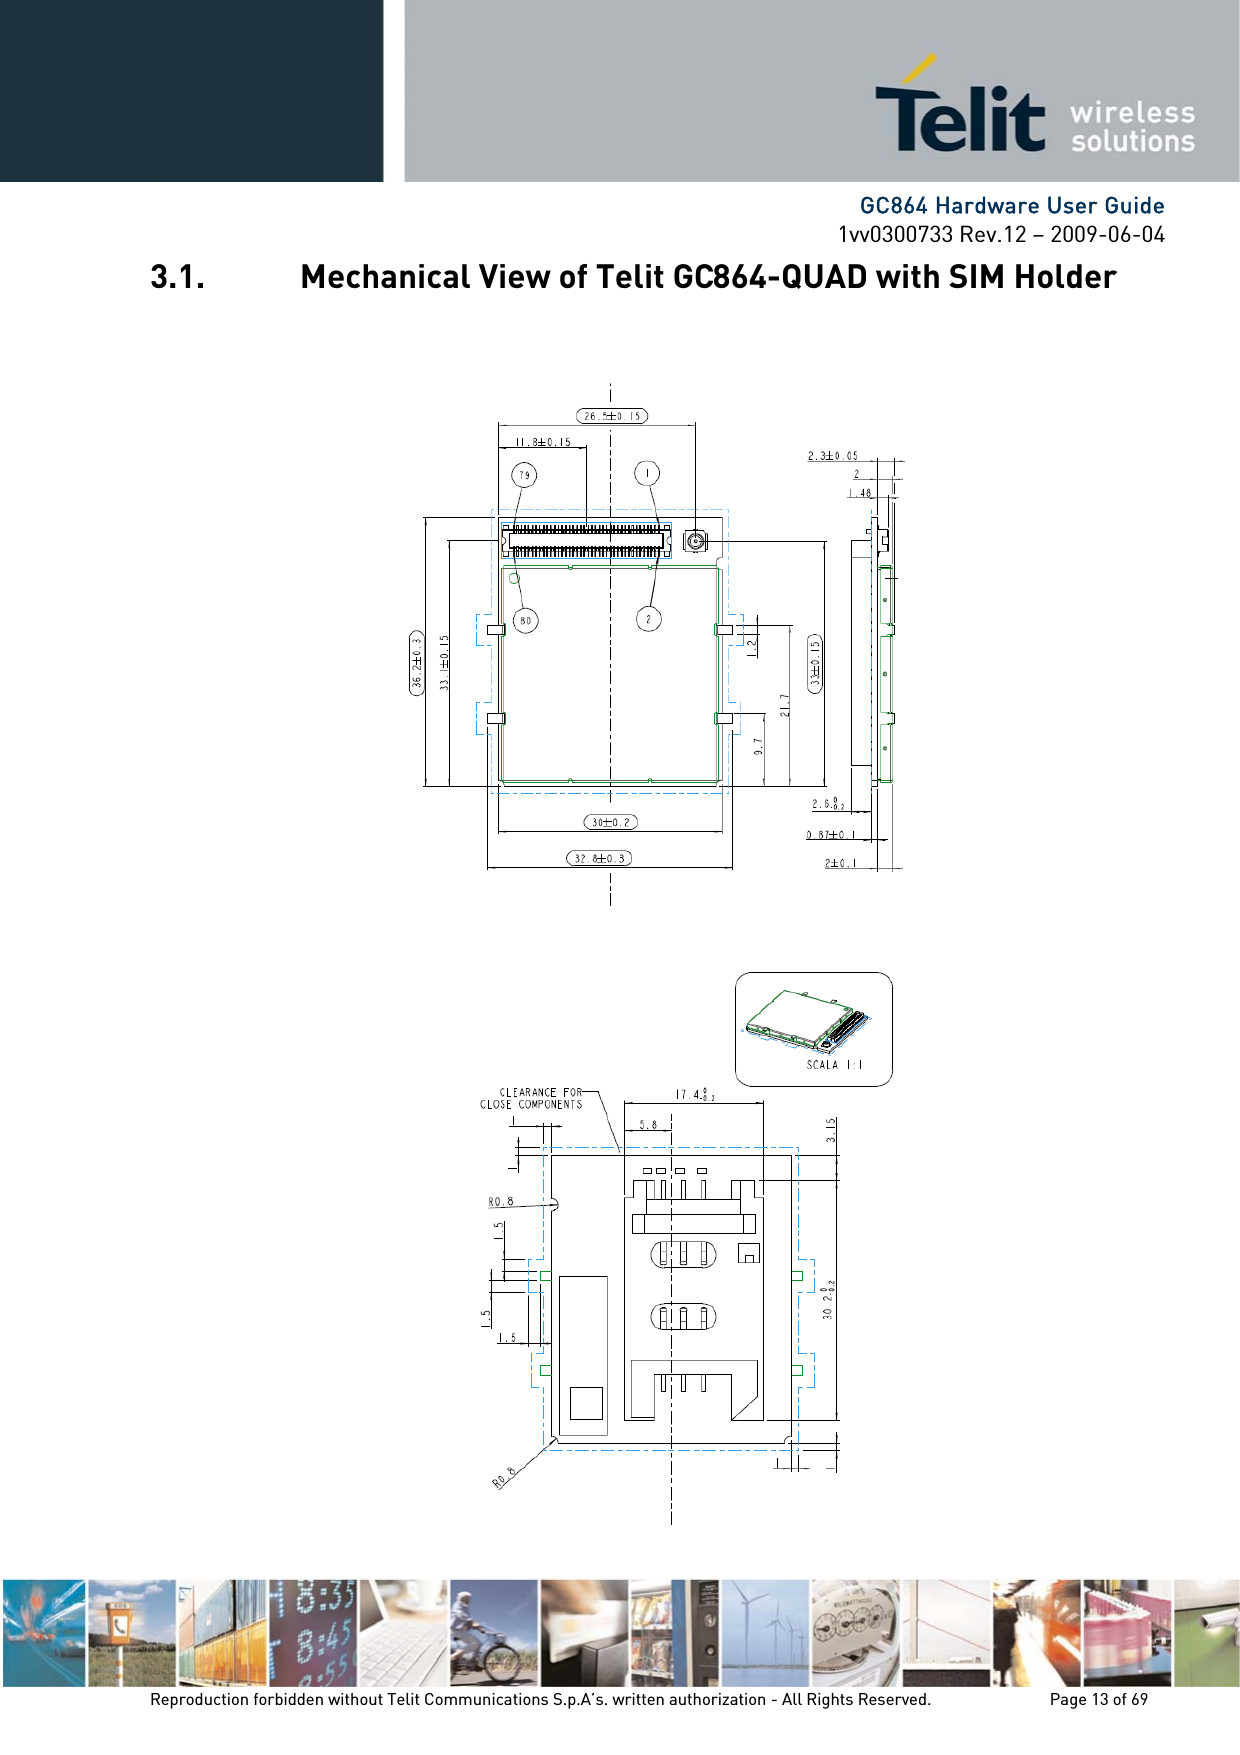      GC864 Hardware User Guide 1vv0300733 Rev.12 – 2009-06-04 3.1. Mechanical View of Telit GC864-QUAD with SIM Holder Reproduction forbidden without Telit Communications S.p.A’s. written authorization - All Rights Reserved.    Page 13 of 69  